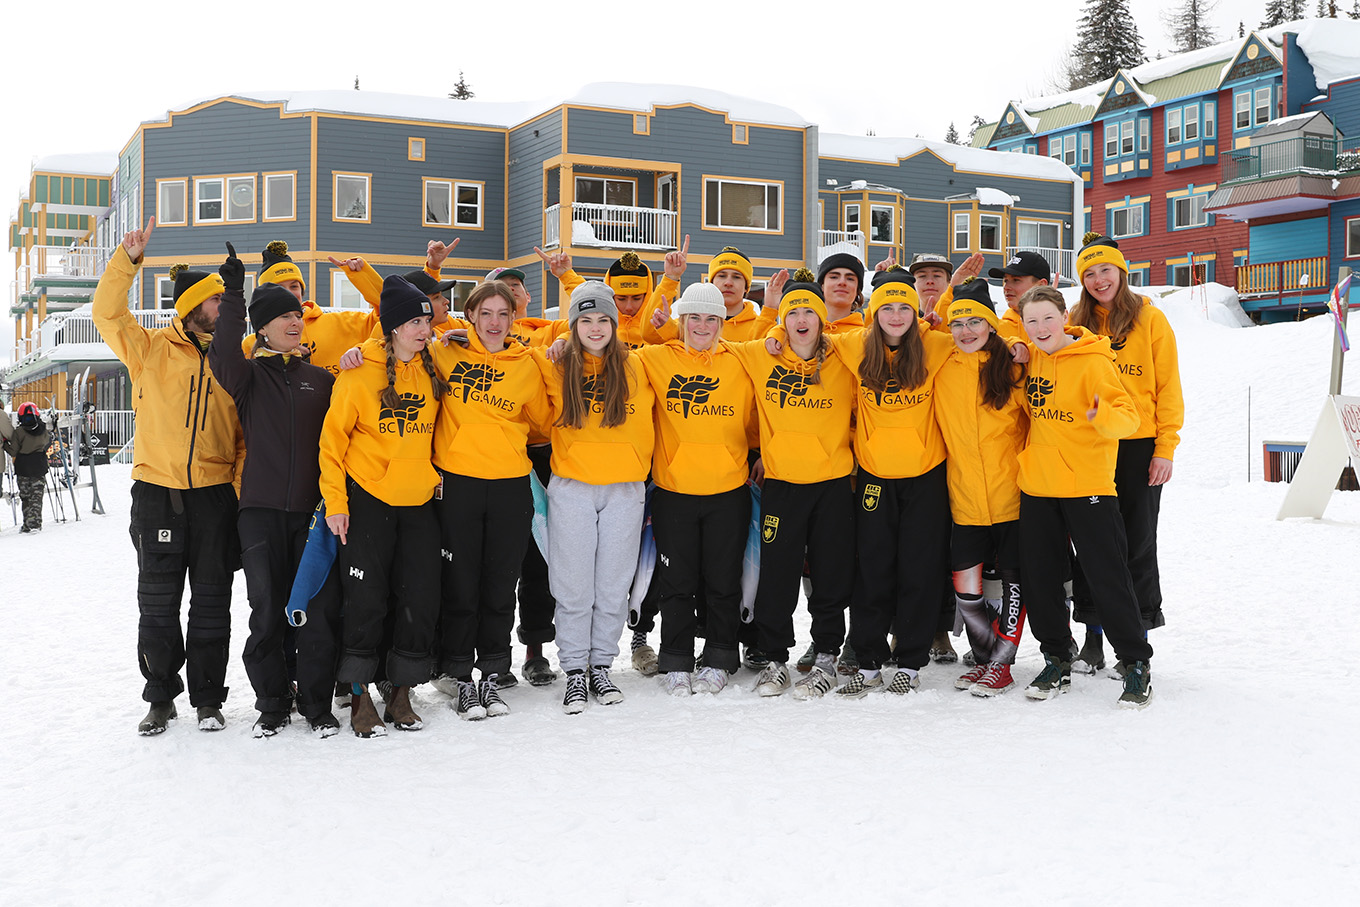 Local skiers gain valuable experience at BC Winter Games in Vernon, Purcell earns $1000 bursary